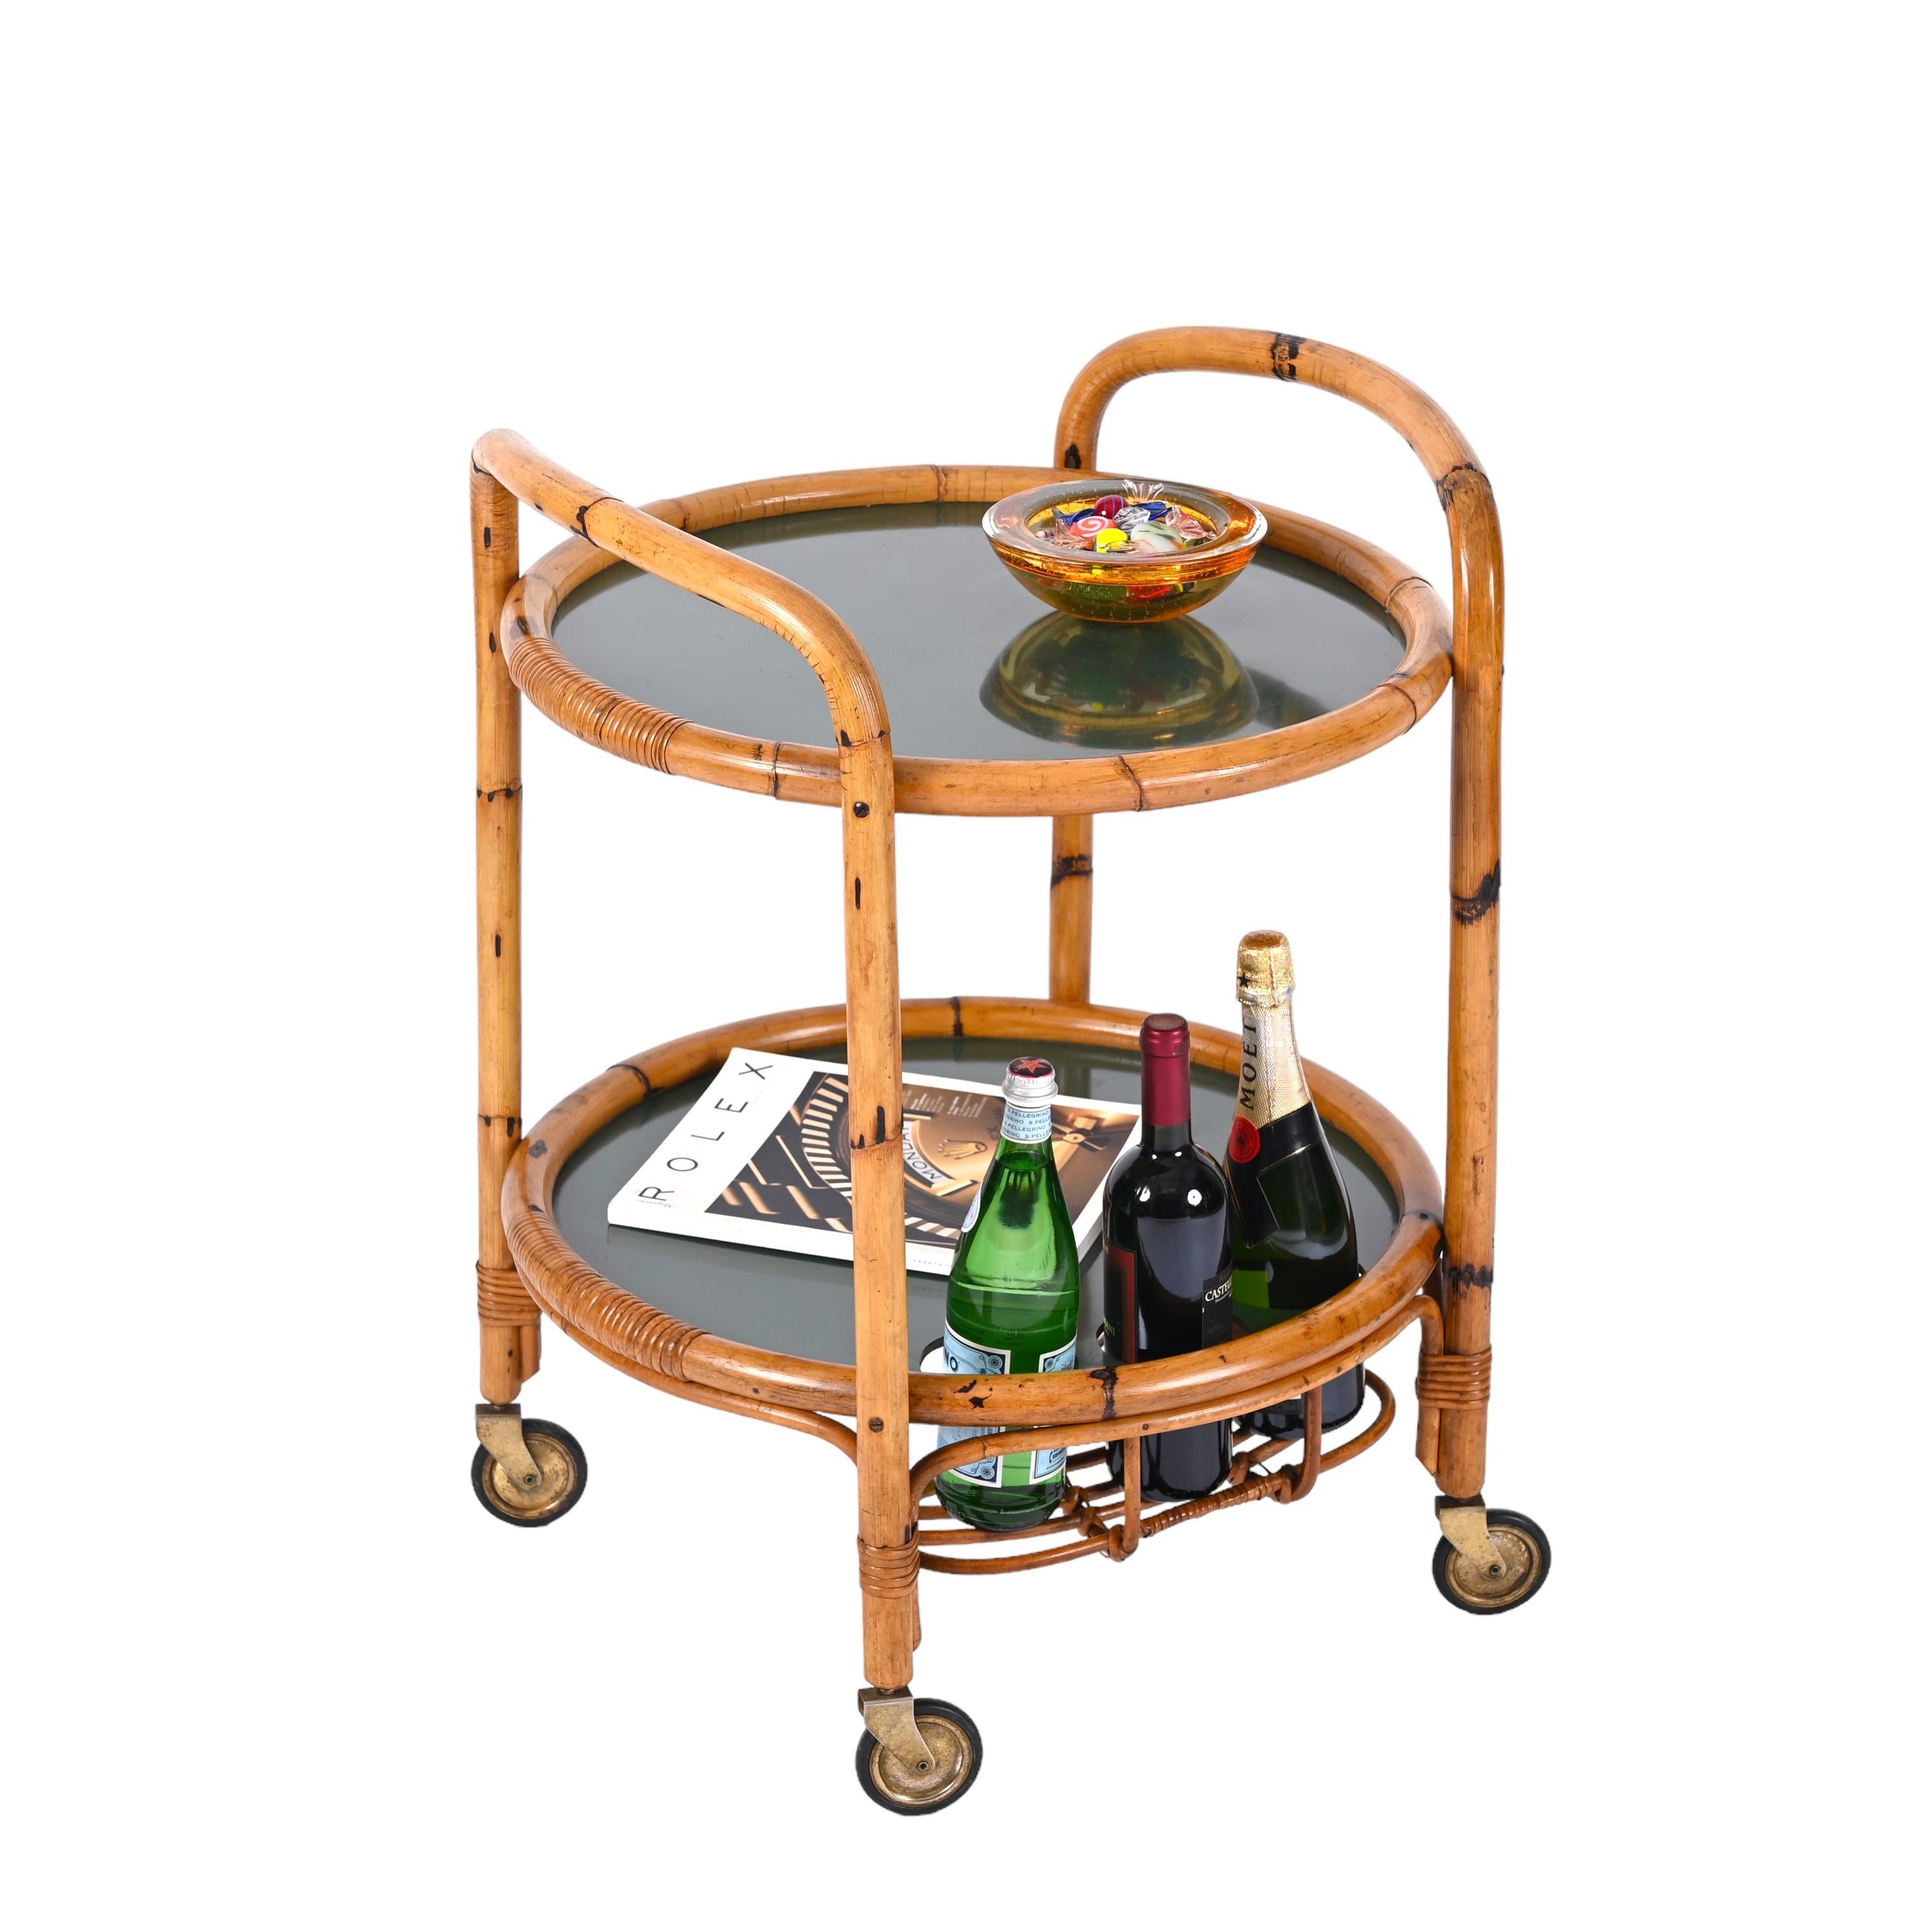 Mid-Century Modern Midcentury Bar Serving Cart in Bamboo, Rattan and Green Formica, Italy, 1970s For Sale